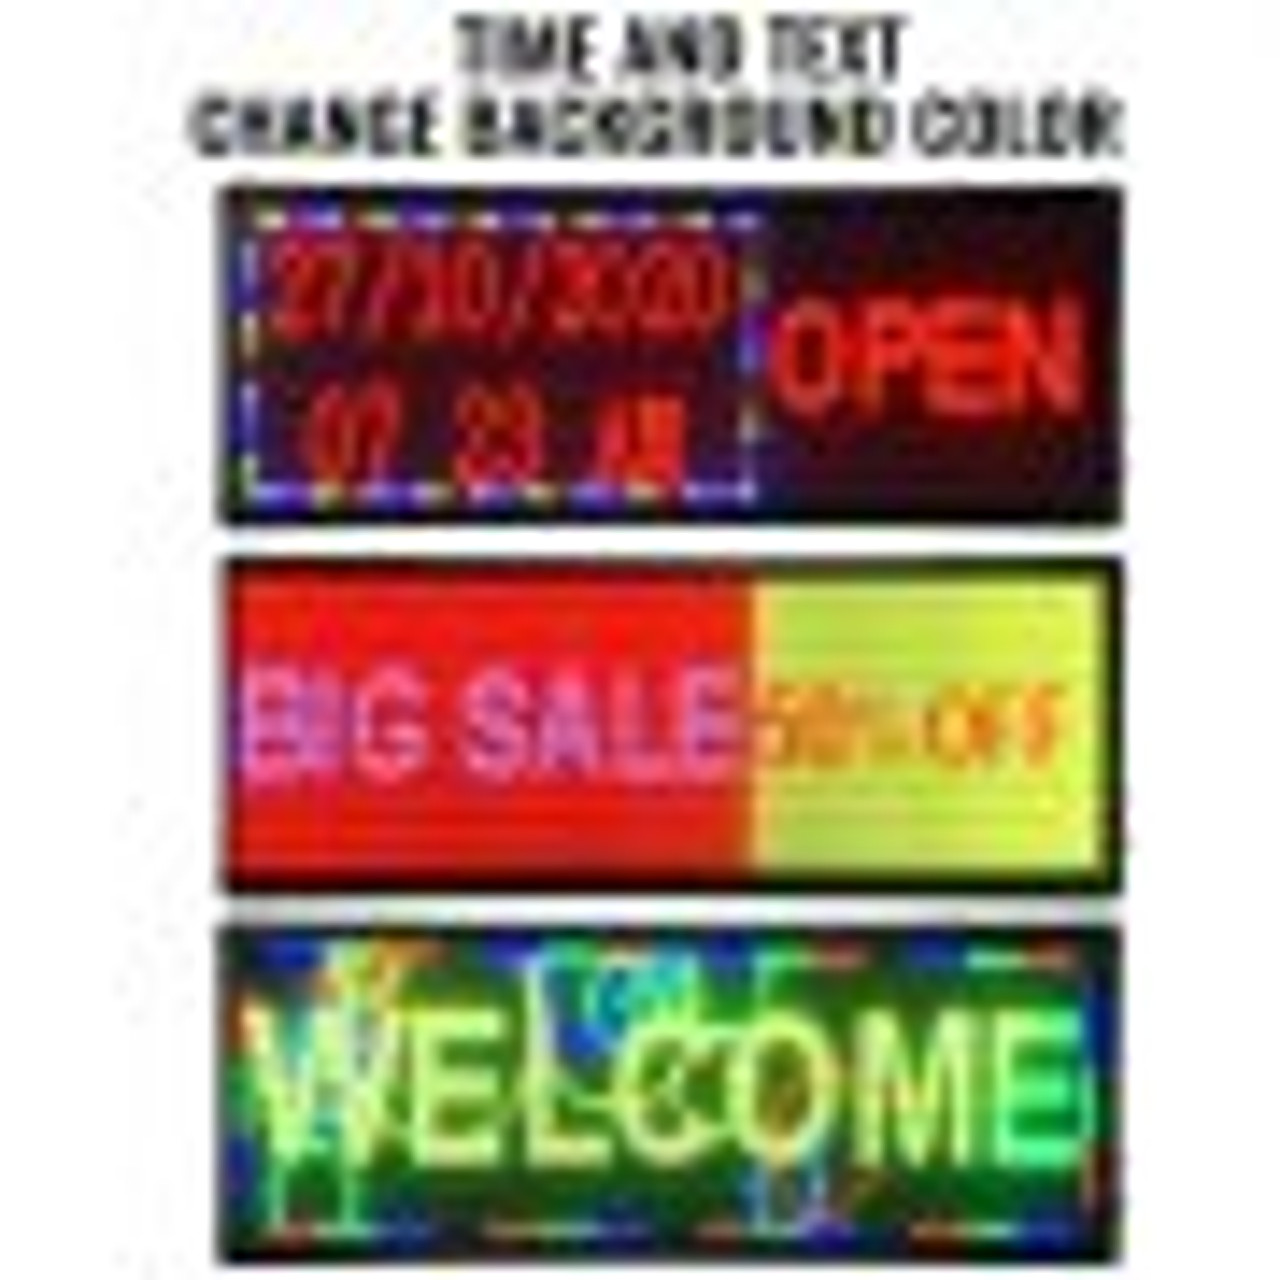 LED display with WIFI FULL color sign 40 x 8 with high resolution P10 and  new SMD technology. HIGH BRIGHTNESS programmable scrolling sign, Perfect